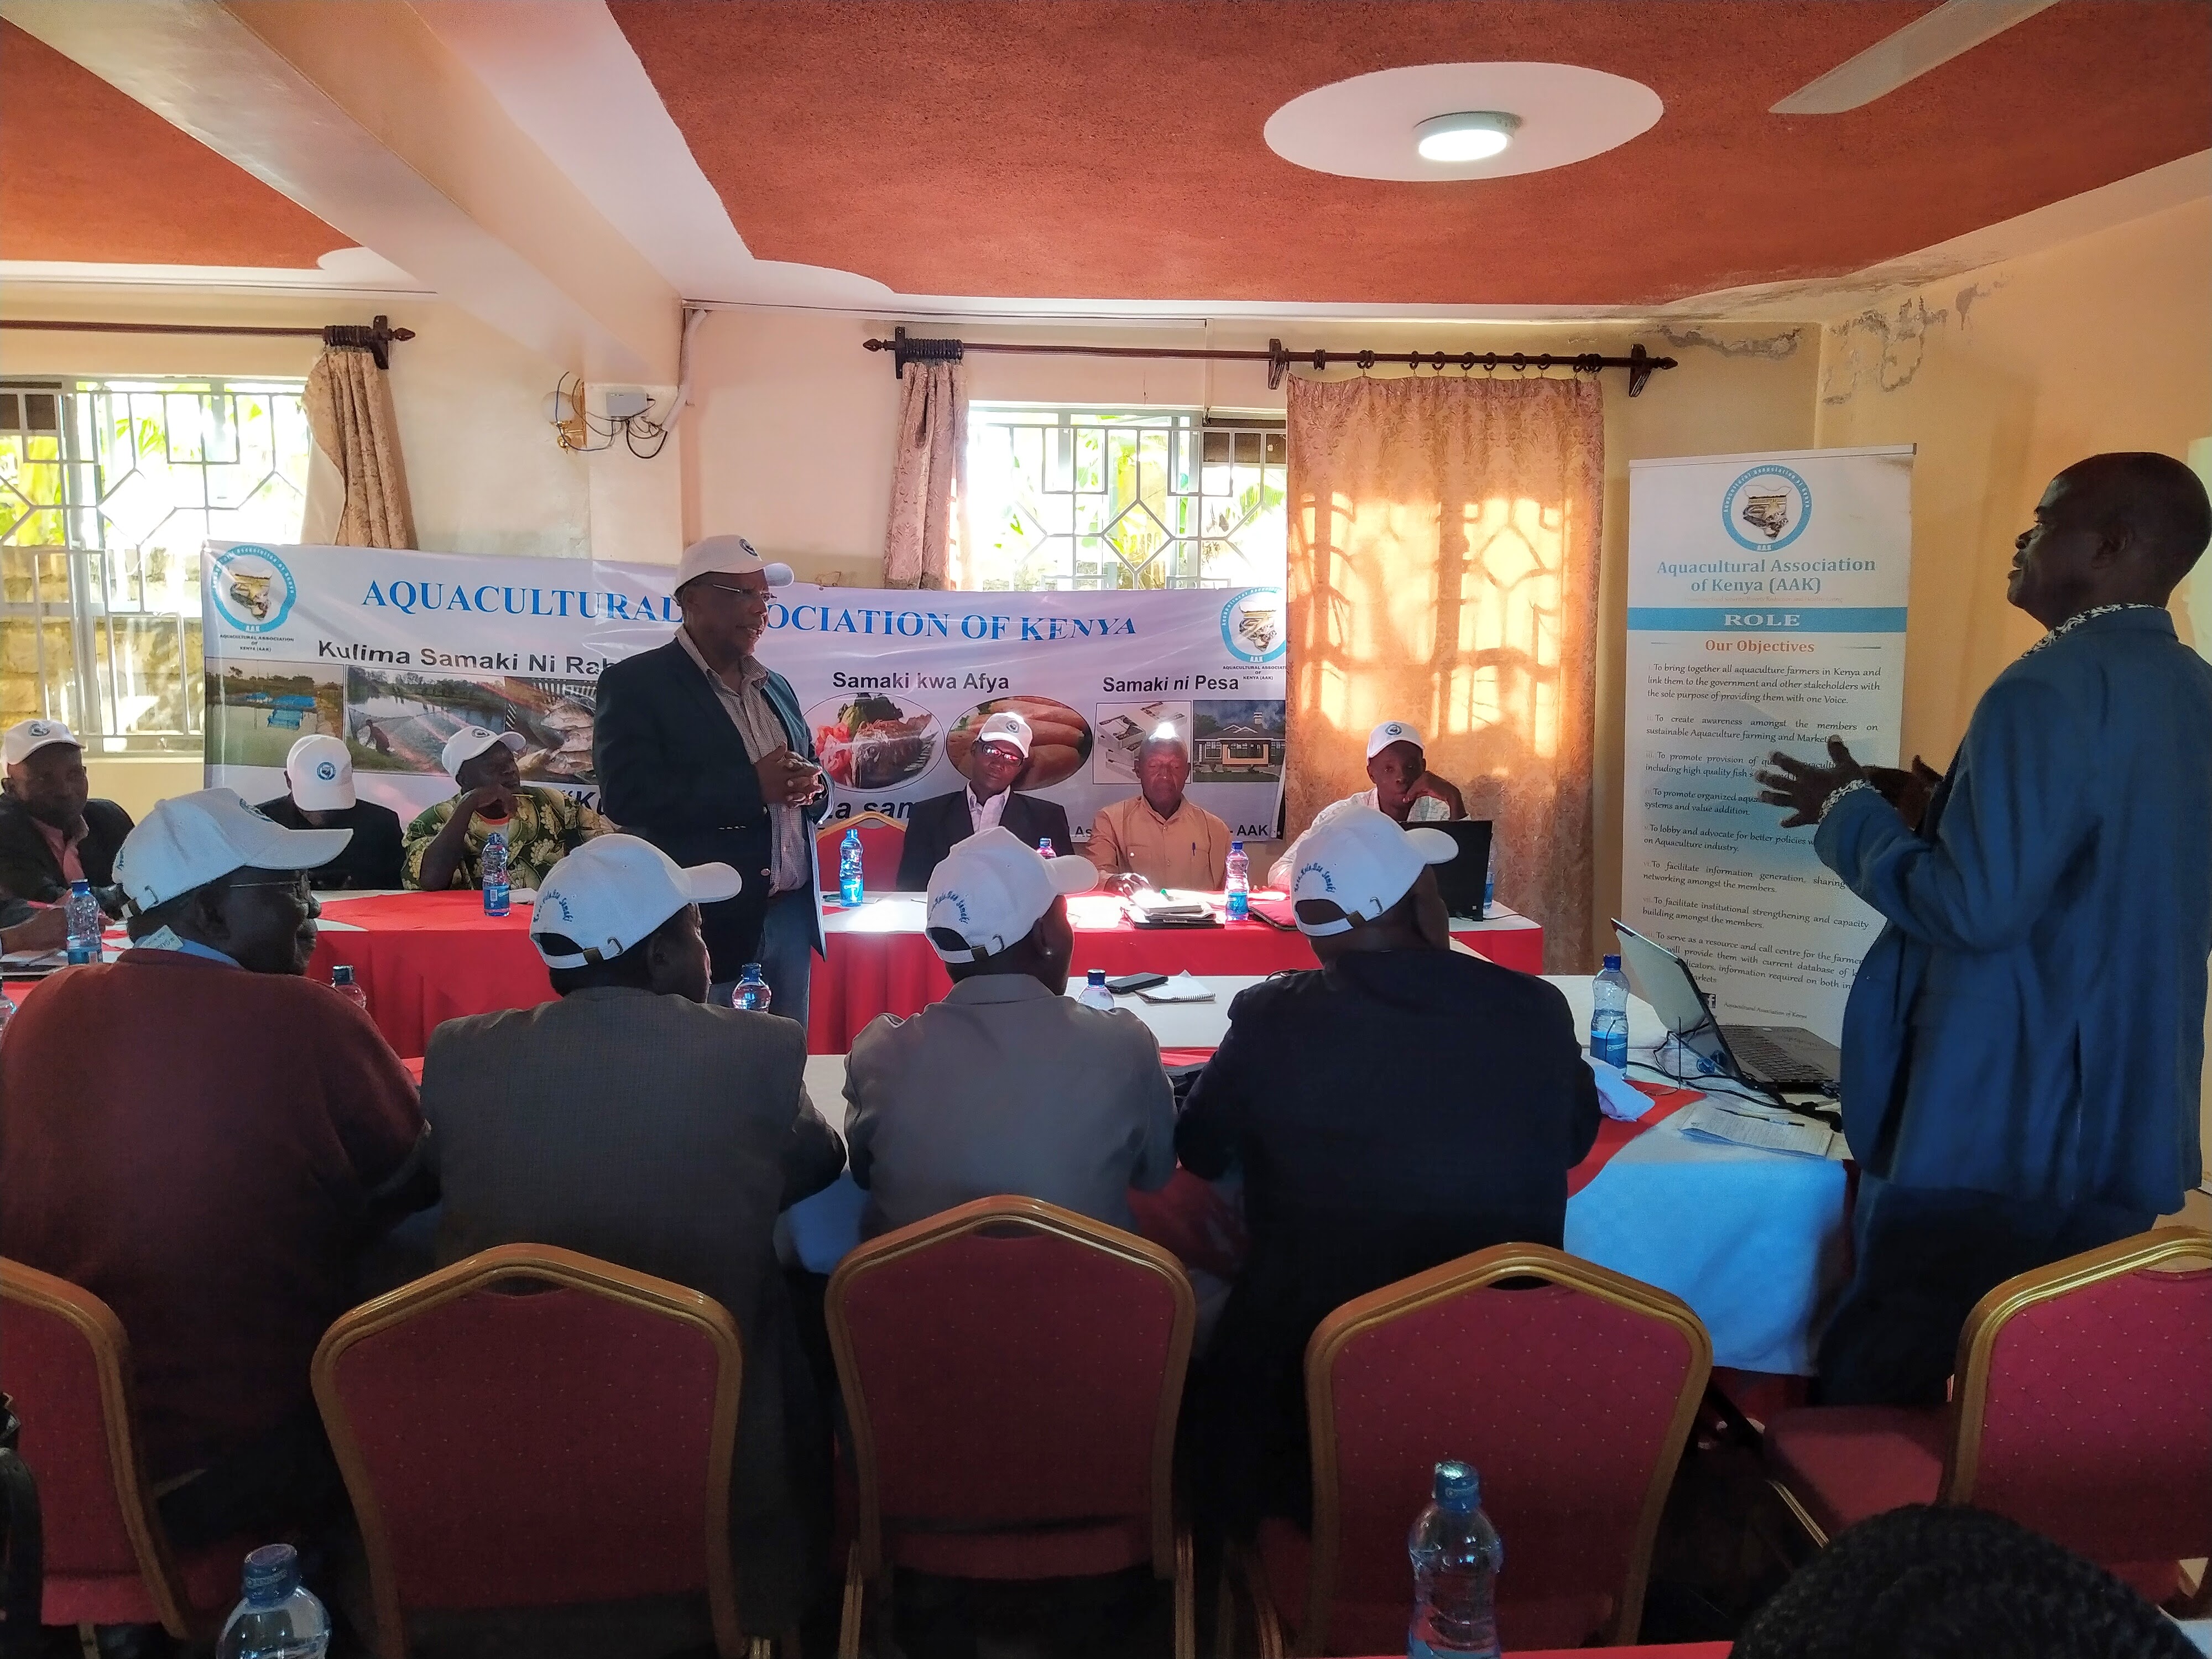 Leaders sensitization on policy issues in Aquaculture